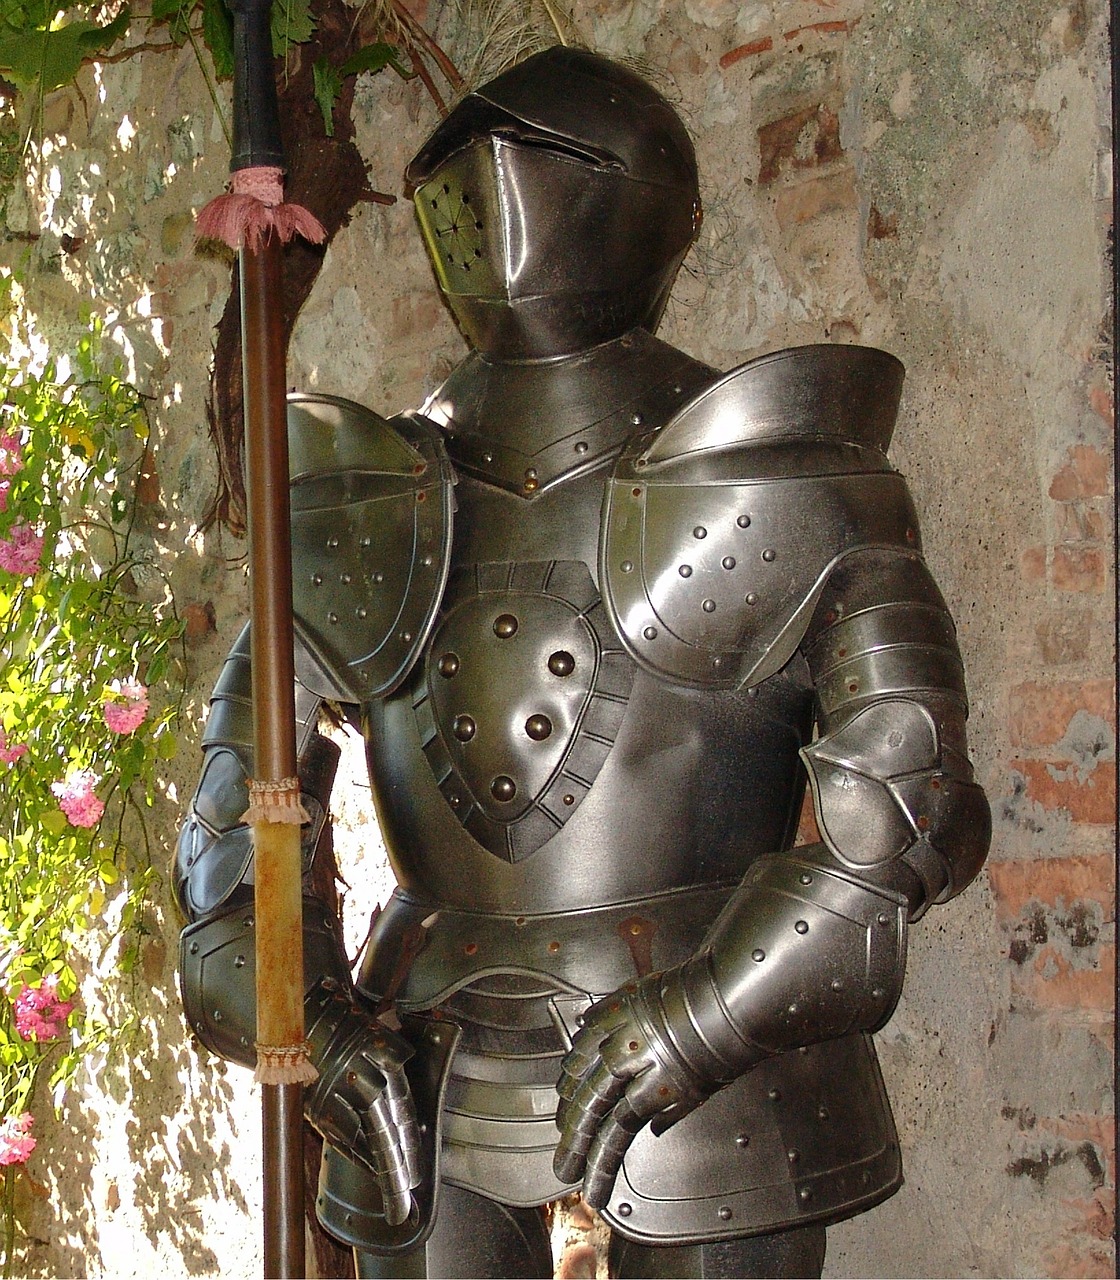 armor knight middle ages free photo